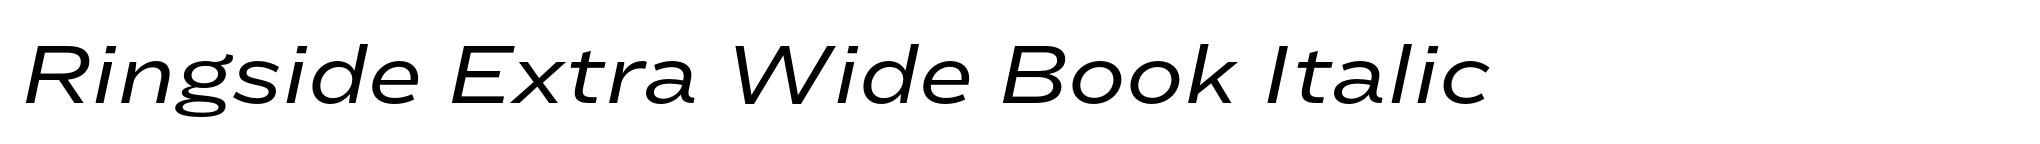 Ringside Extra Wide Book Italic image